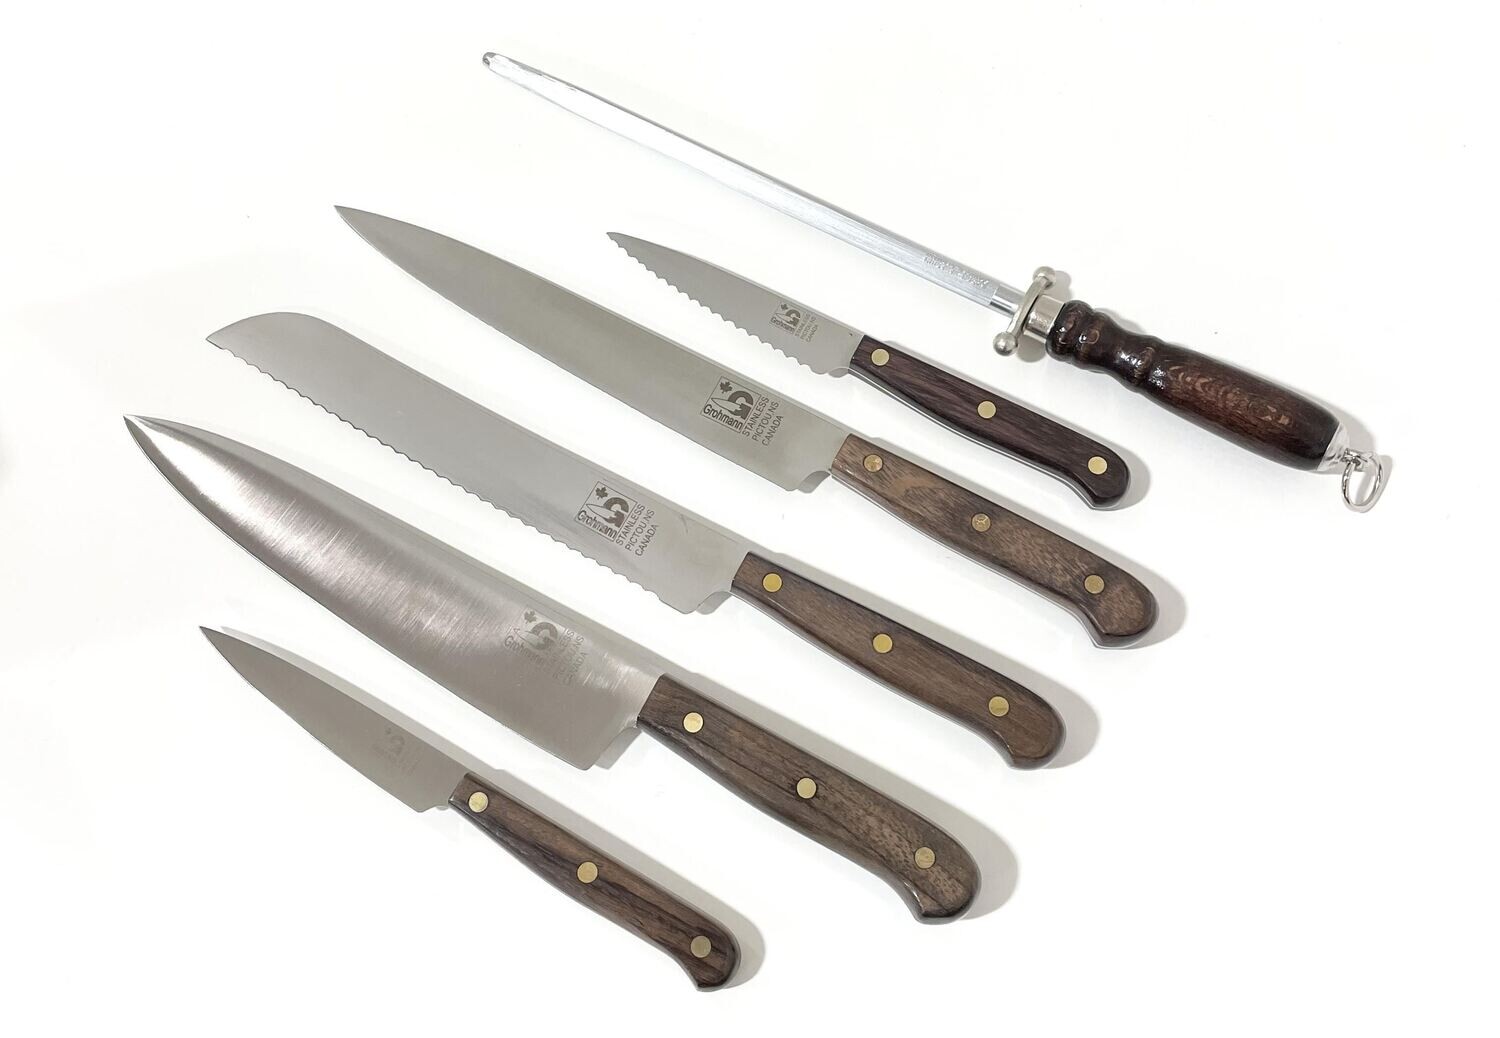 Rosewood Full Tang 7 Piece Kitchen Set with Block- Grohmann Knives